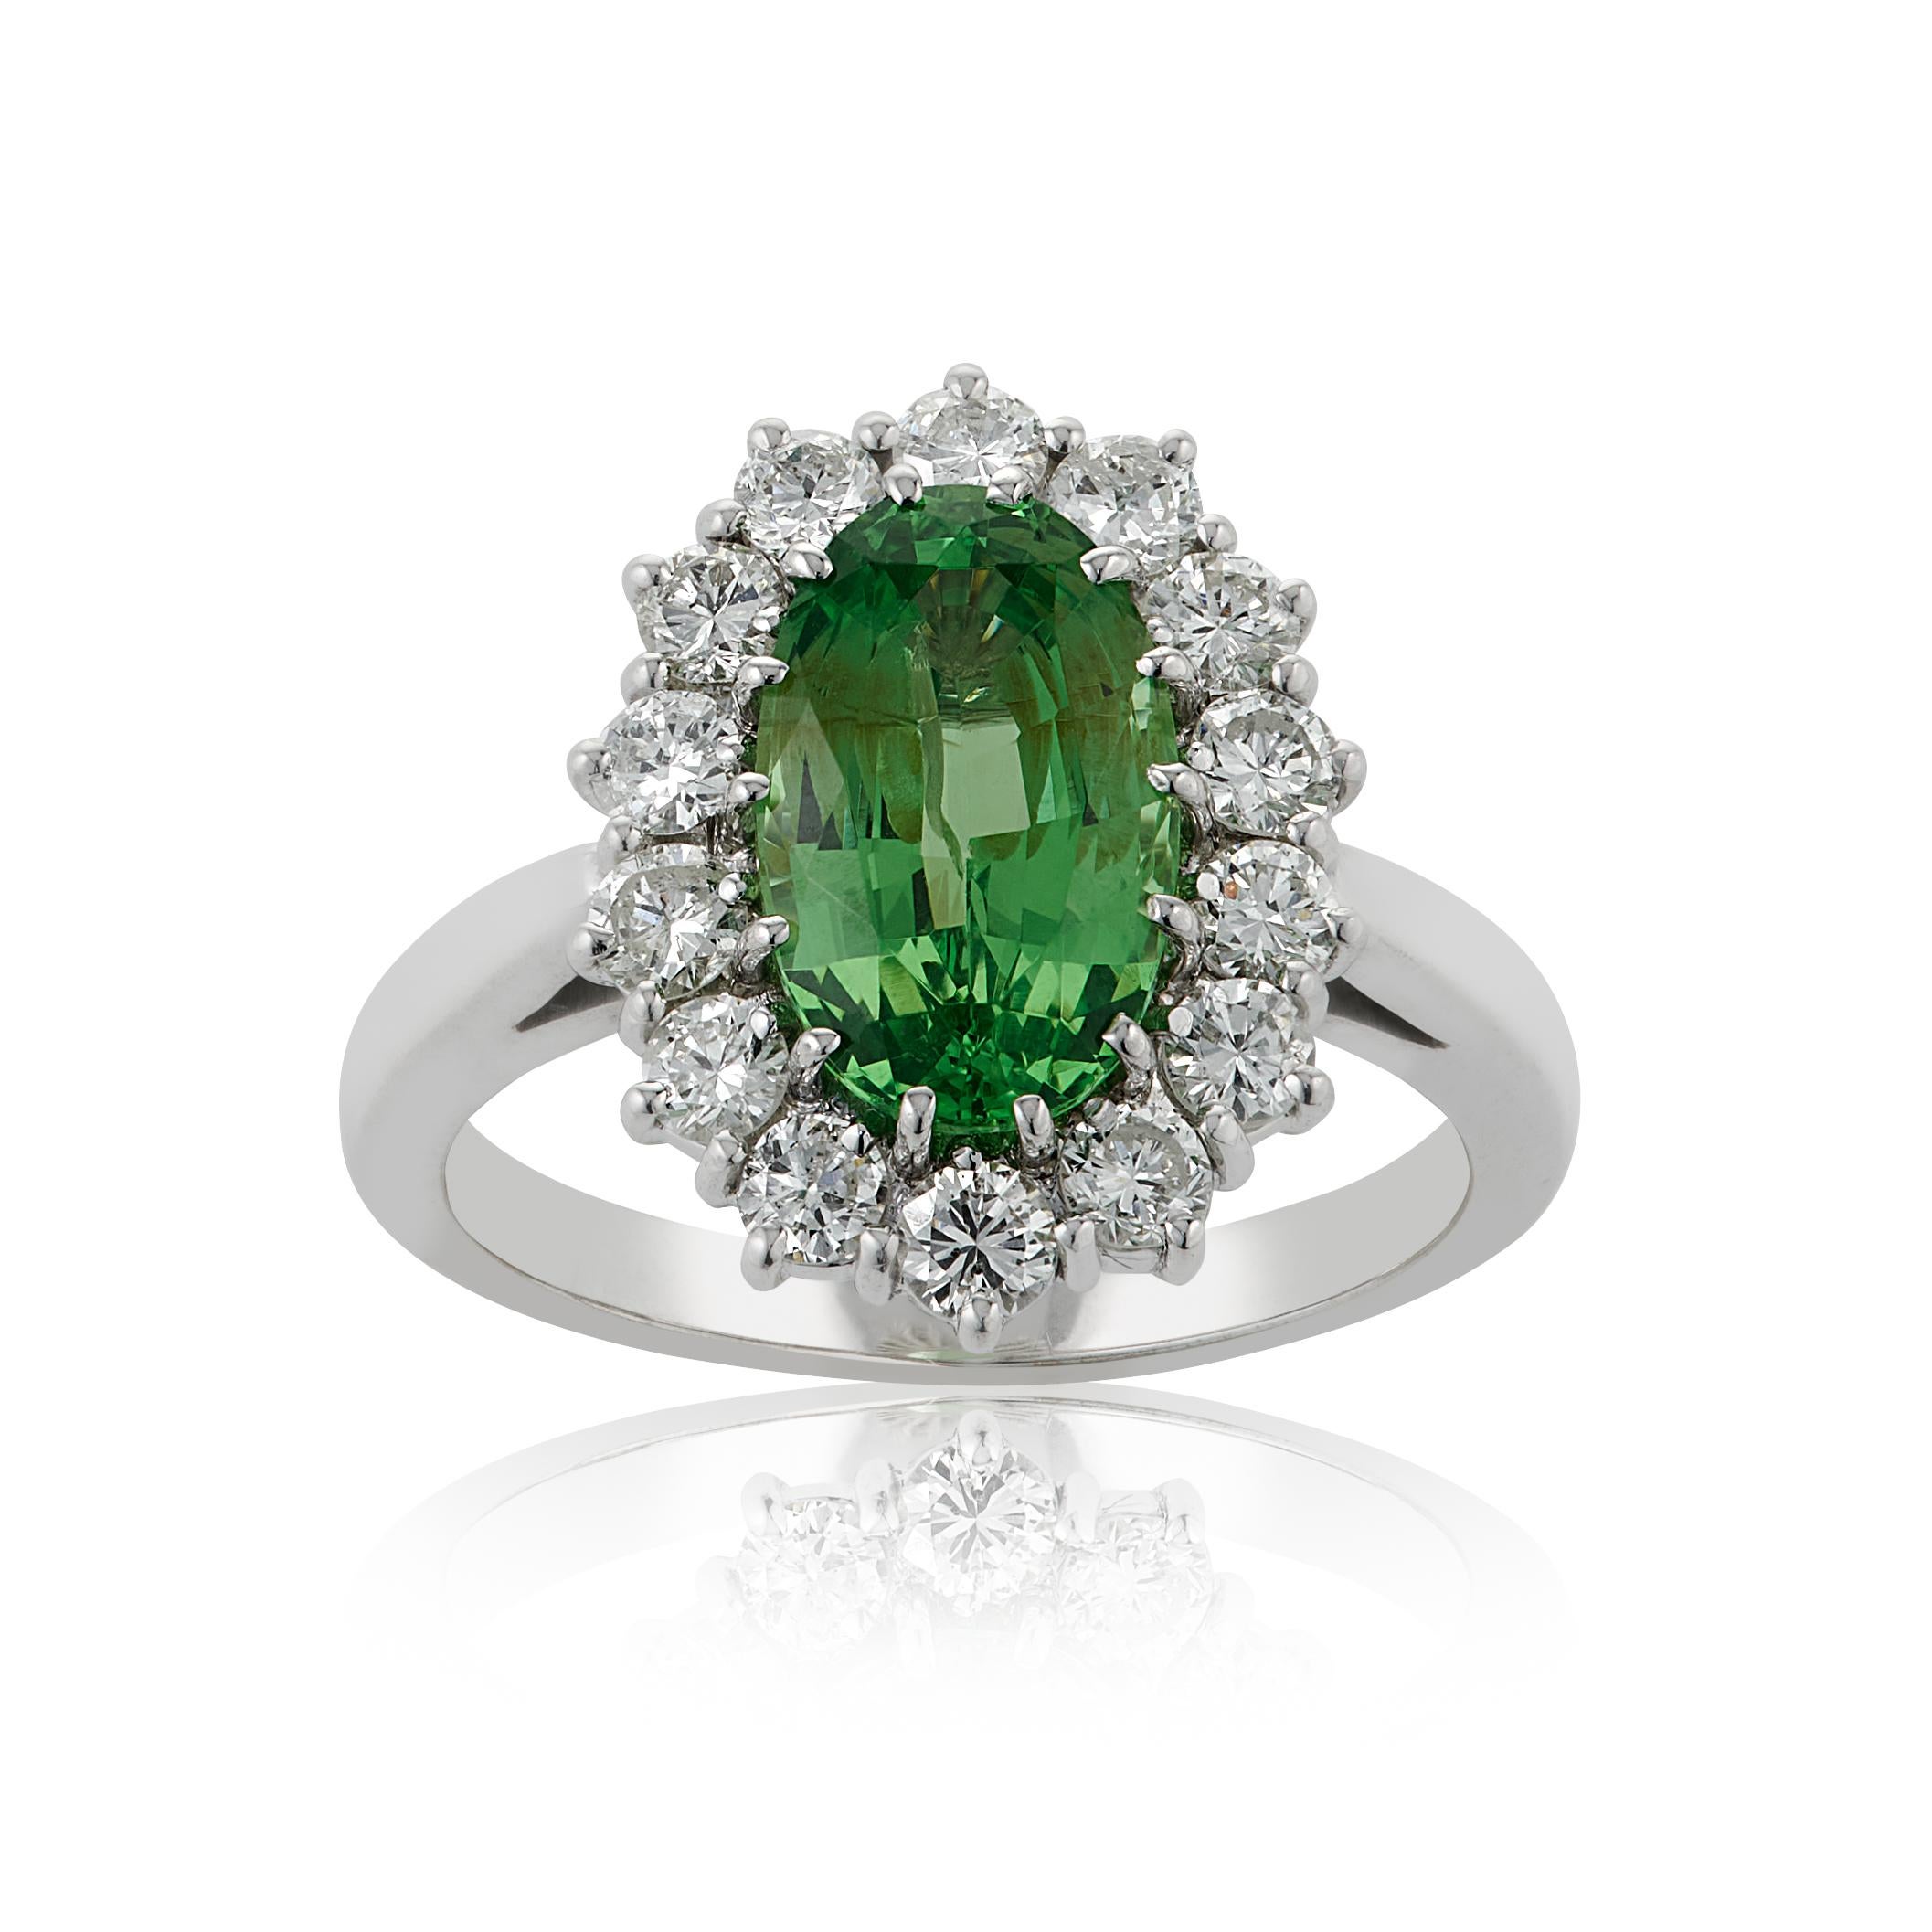 E Wolfe & Co Handmade 18ct White Gold Tsavorite Garnet and Diamond Cluster Ring. The tsavorite centre stone weighs 3.08 carats and is surrounded by 14 round brilliant-cut diamonds weighing .89 carats which are of G colour and VS clarity. The ring